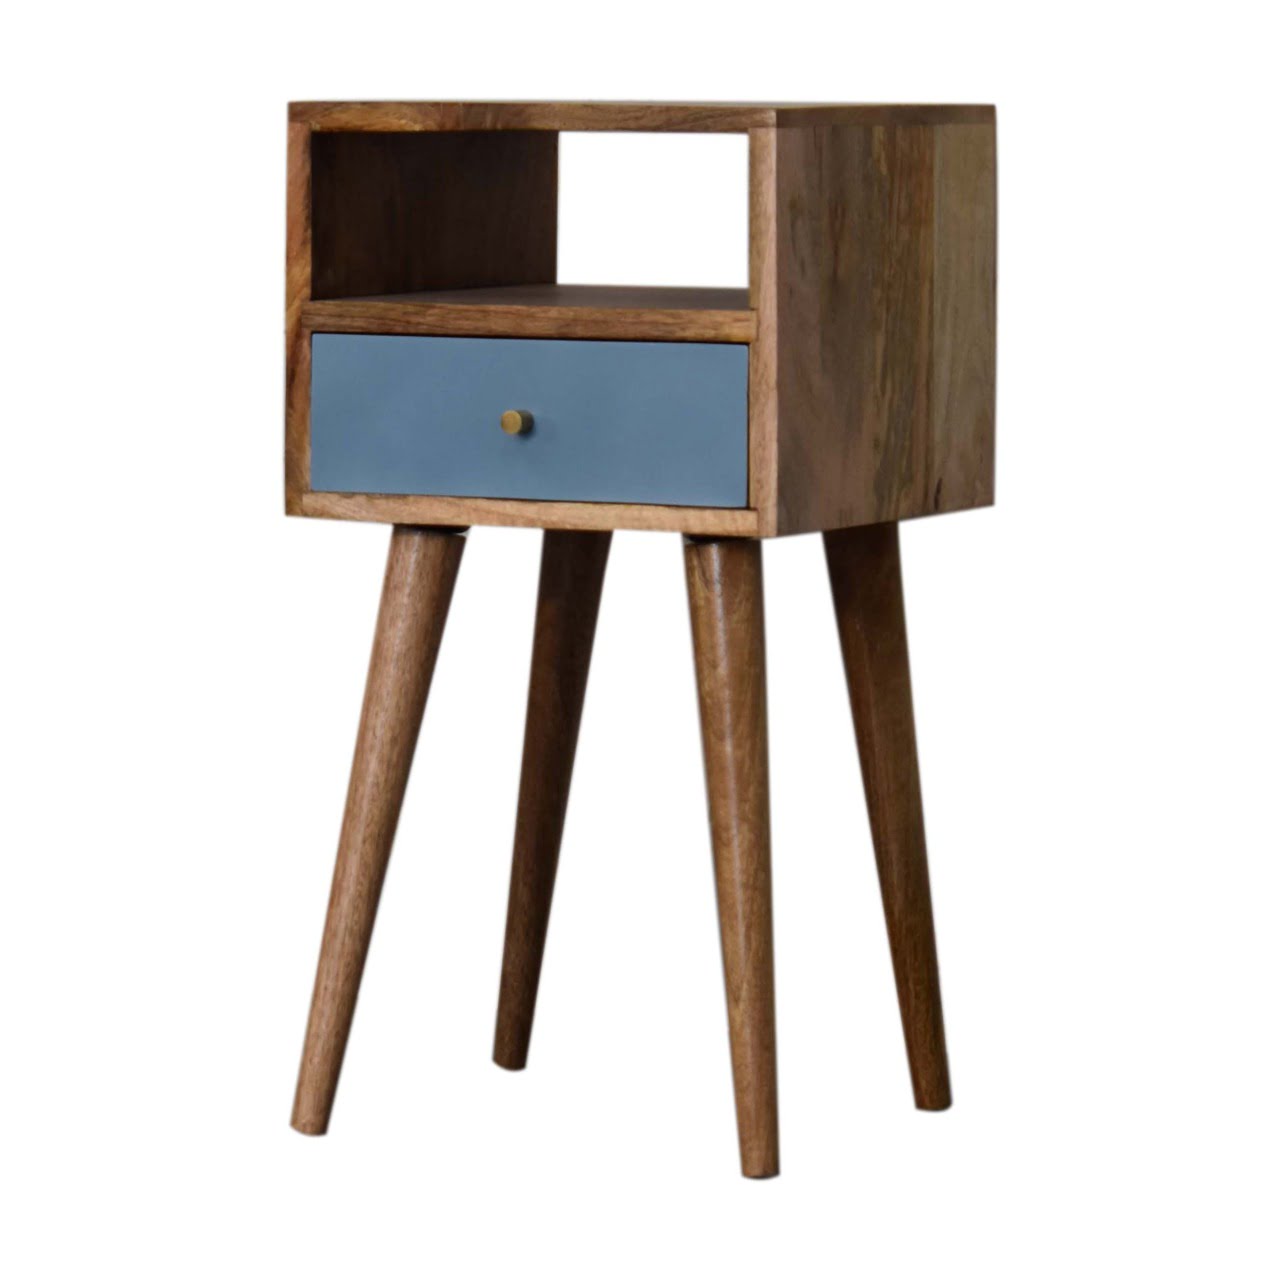 Elly Blue Hand Painted Small Bedside Table | malletandplane.com